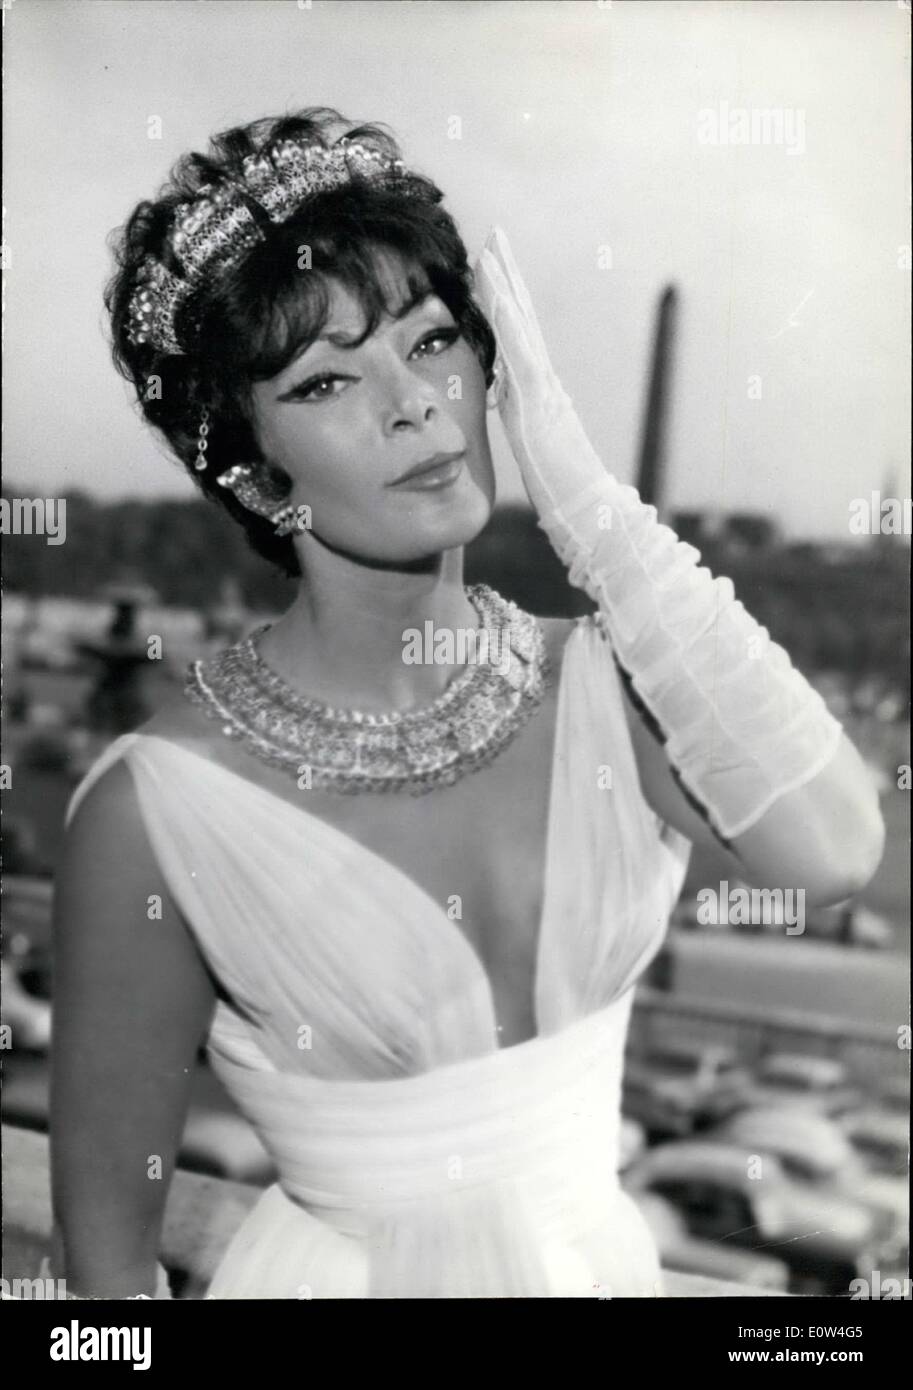 Apr. 04, 1961 - International of Hairdressers show latest hair styles: The ''International of Hairdressers'' showed their latest creations in hair styles at the hotel Crillon, Paris, this afternoon. Photo Shows Lucky, the famous Paris model, showing ''Artichaut'', designed by Alexander. Stock Photo